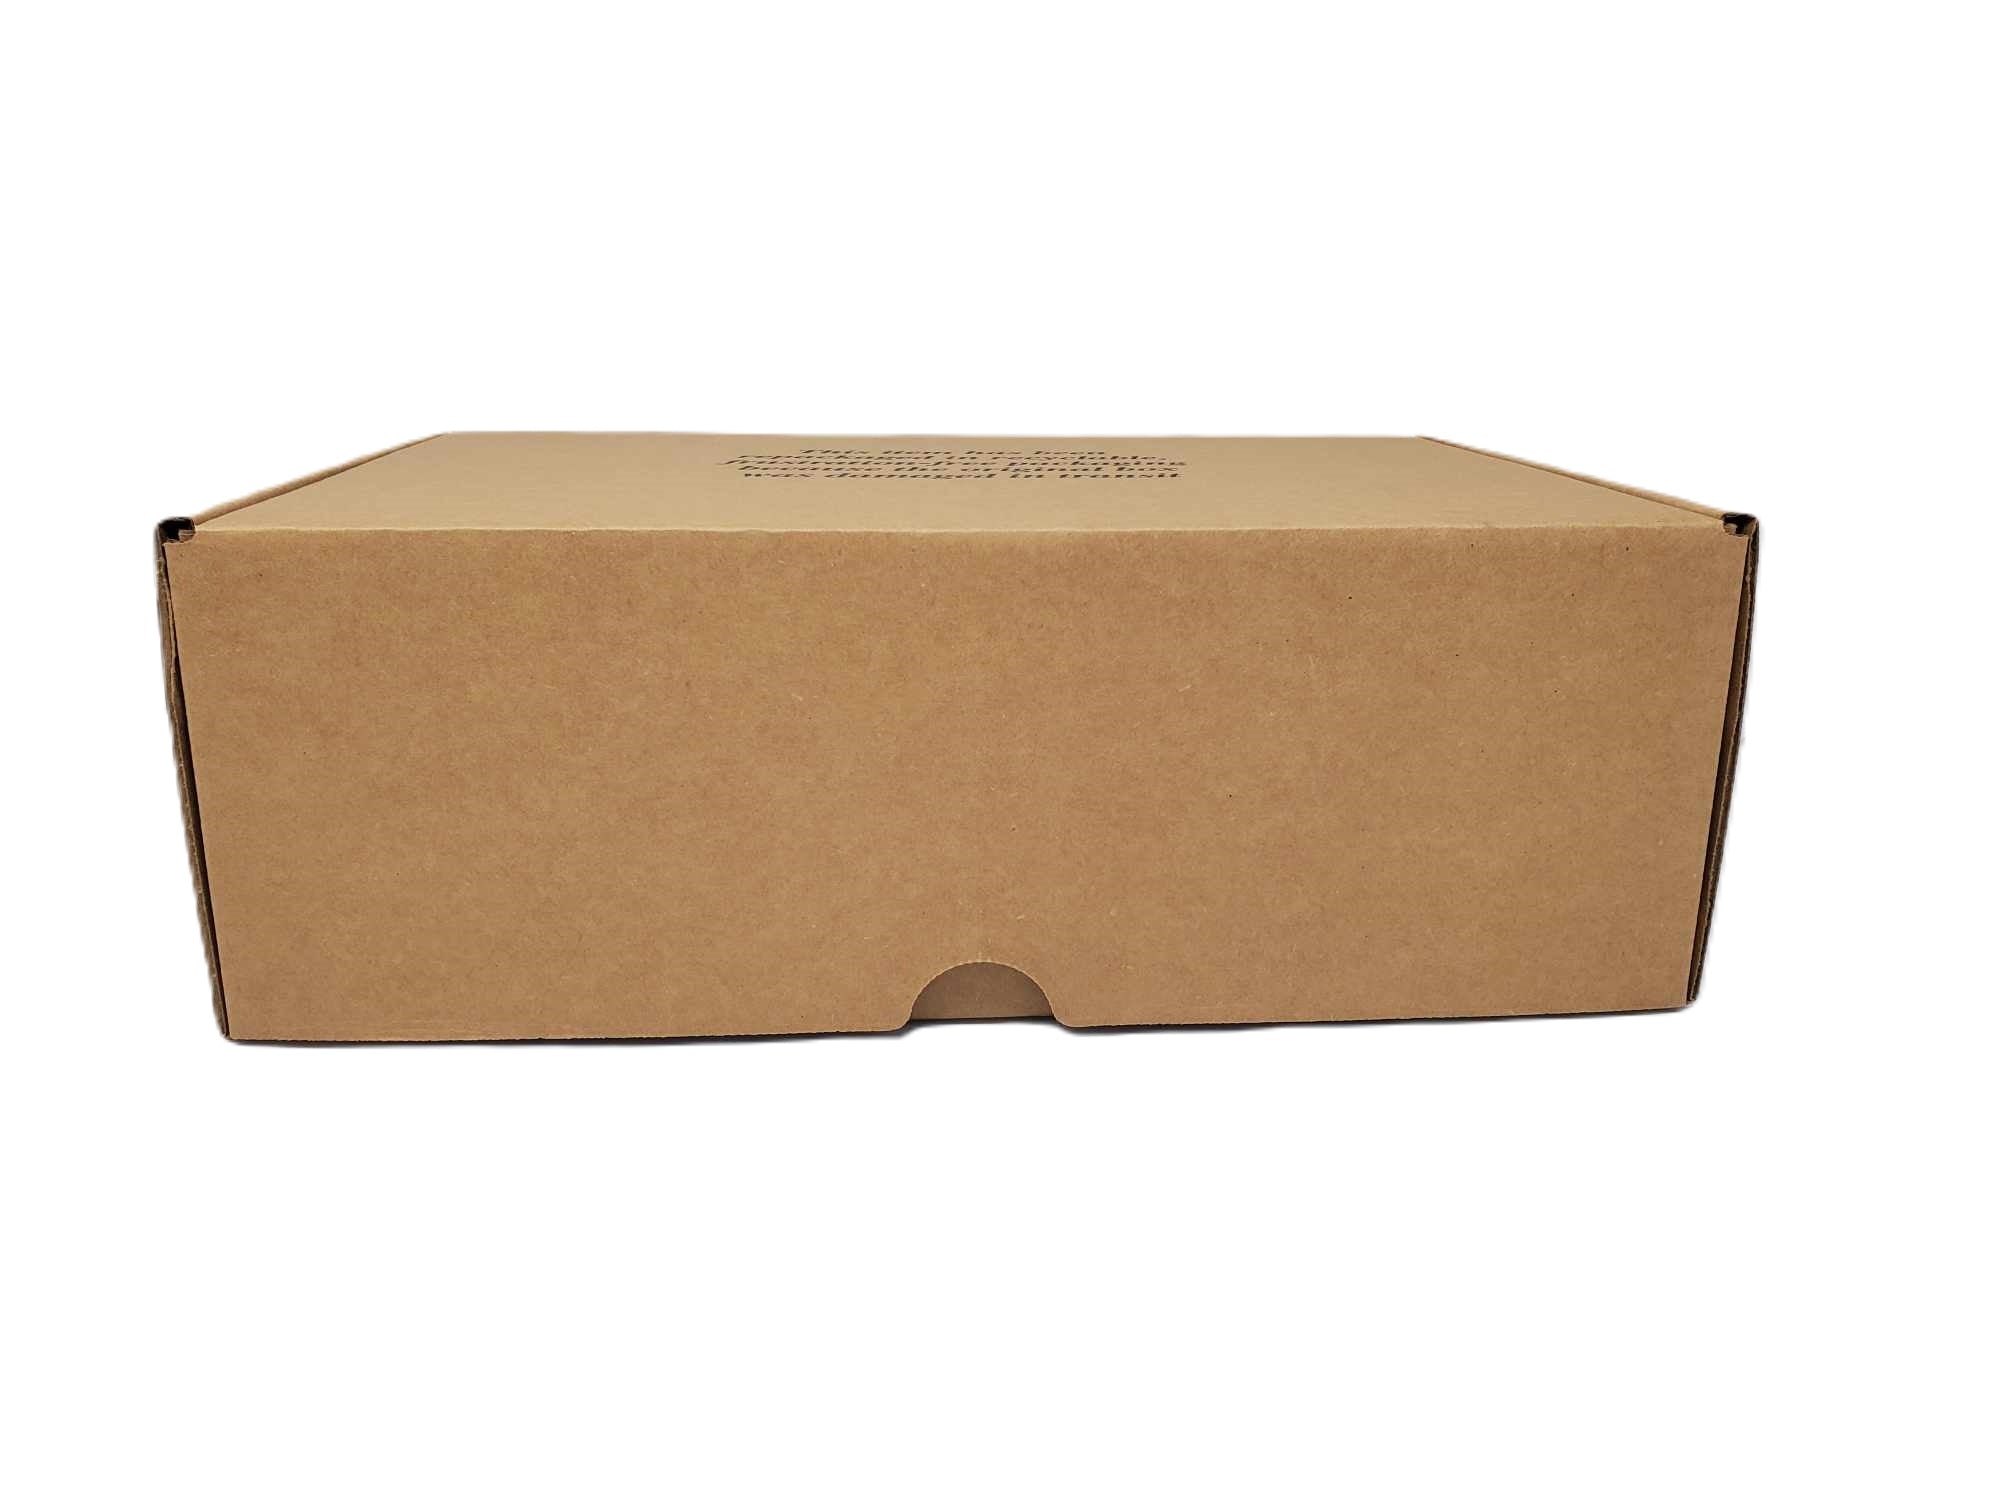 BEST Shipping and Replacement SHOE BOXES - HEAVY DUTY - 14.5